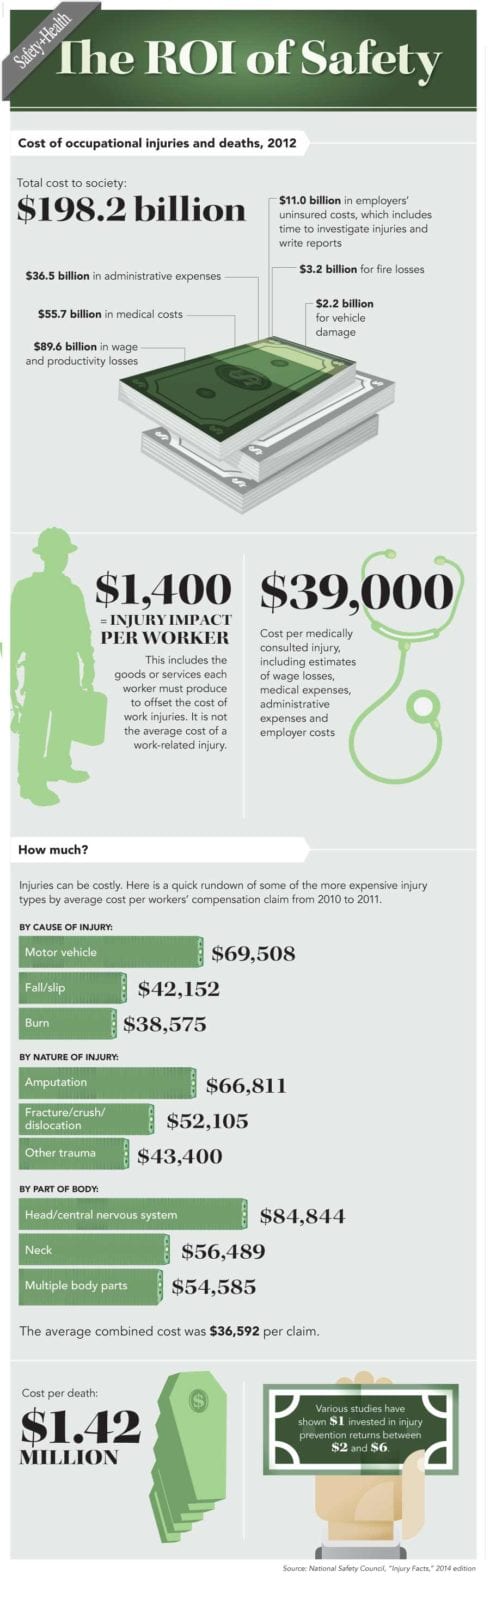 safety-roi-infographic